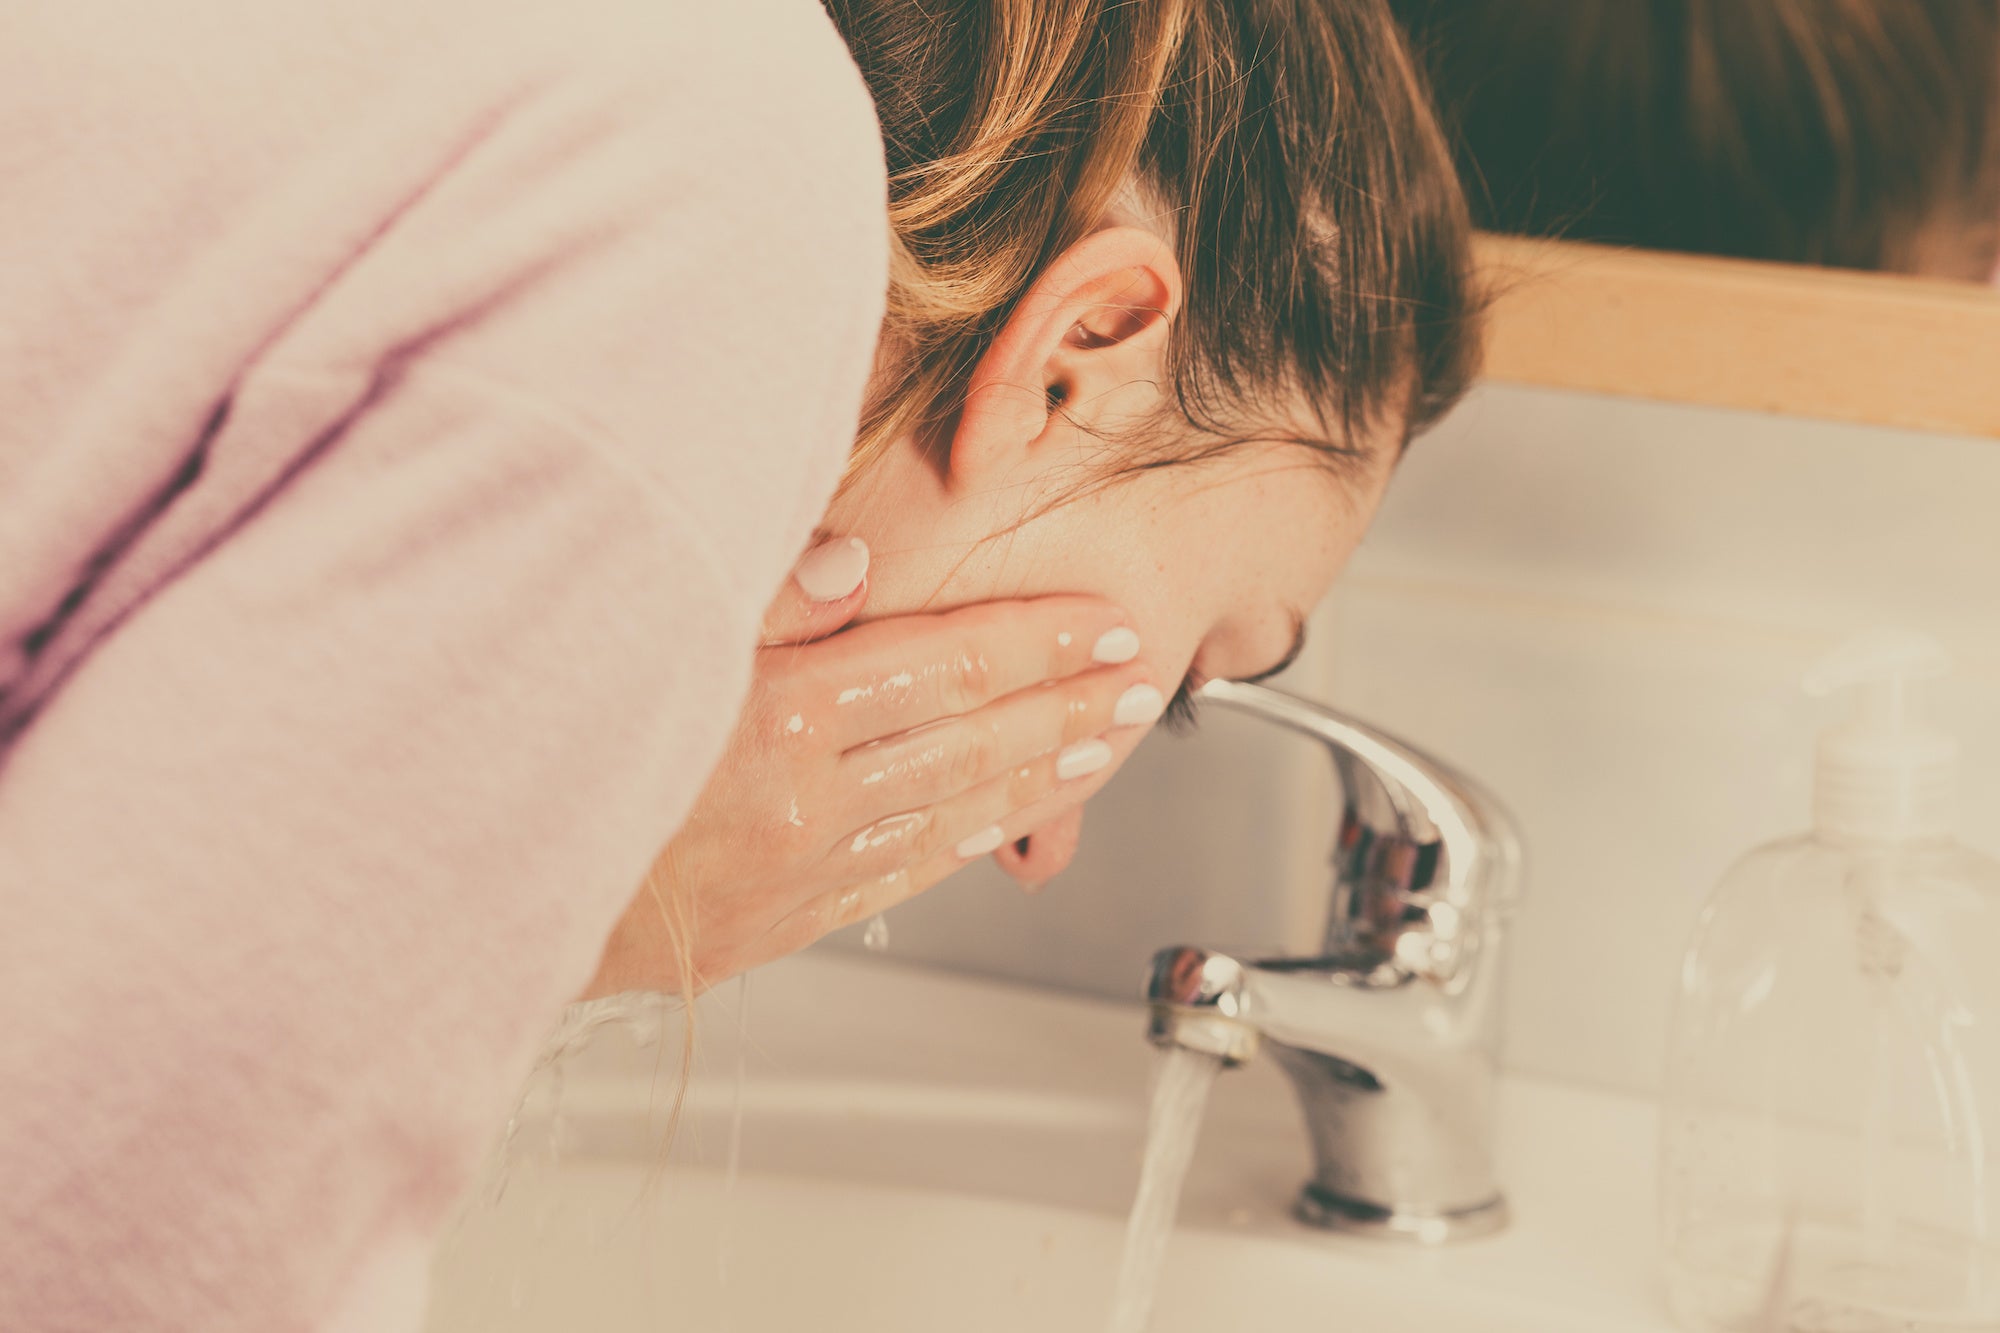 Does Washing Your Face Cause Acne?